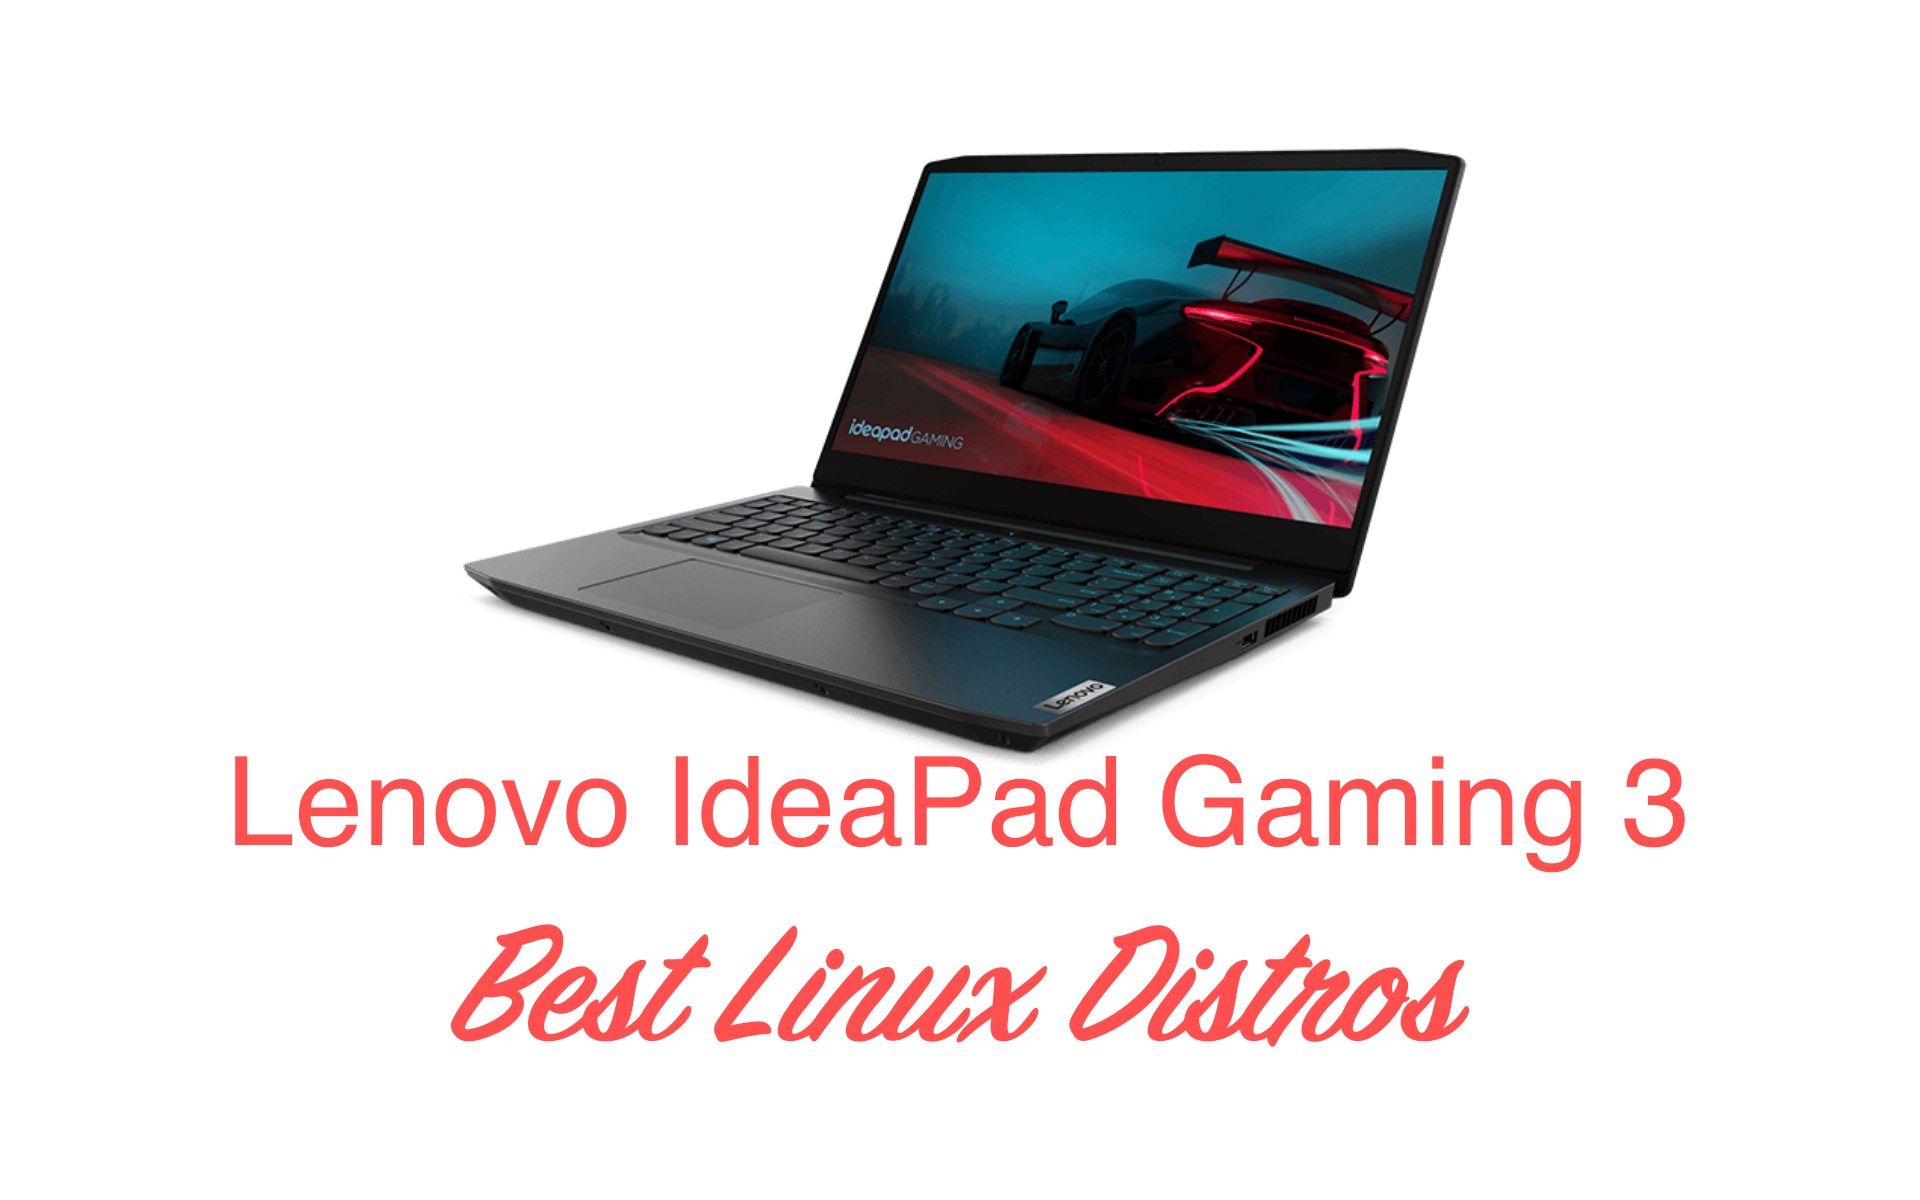 Best Linux Distros for the Lenovo IdeaPad Gaming 3 AMD Gaming Laptop